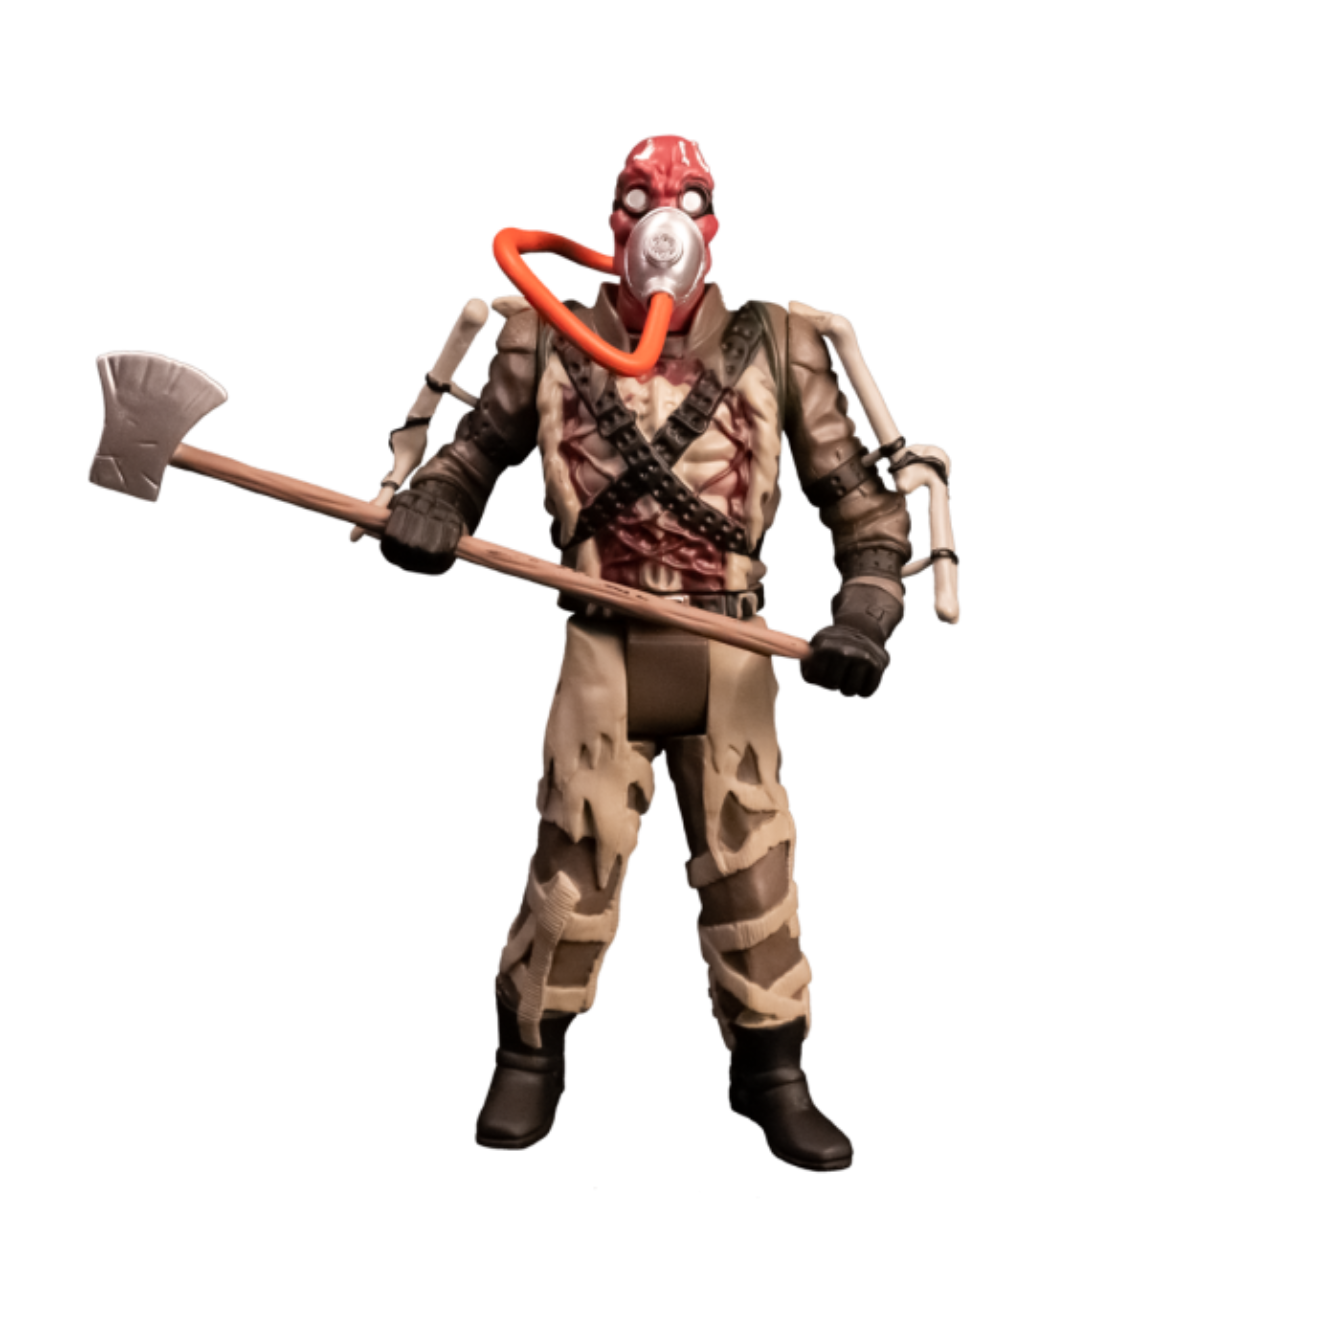 House of 1,000 Corpses - Rippin’ Axe Professor Action Figure